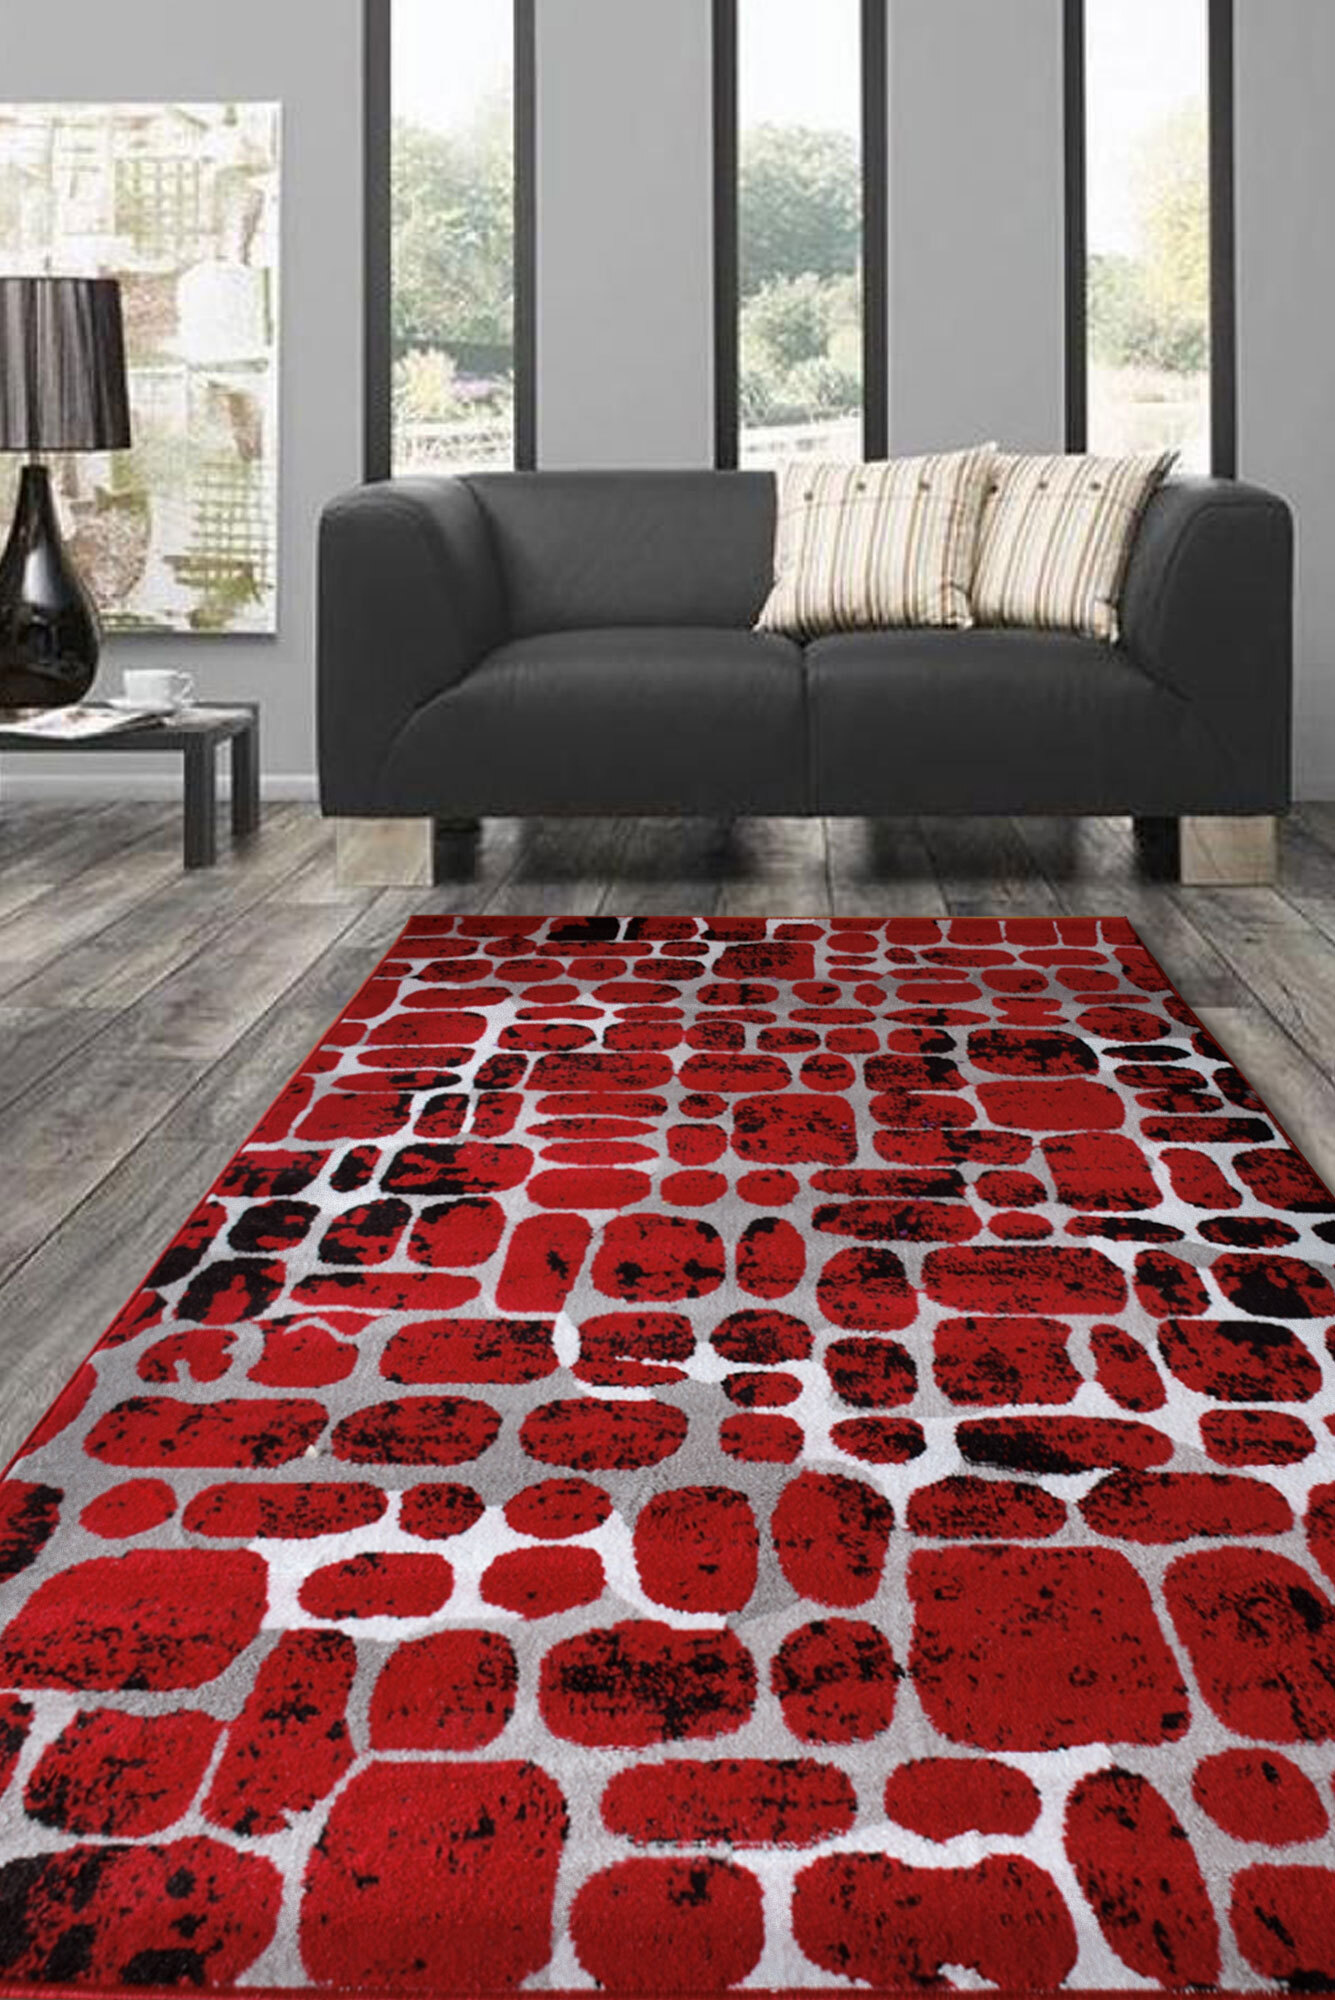 Atlanta Modern Red Abstract Rug(Size 170 x 120cm)